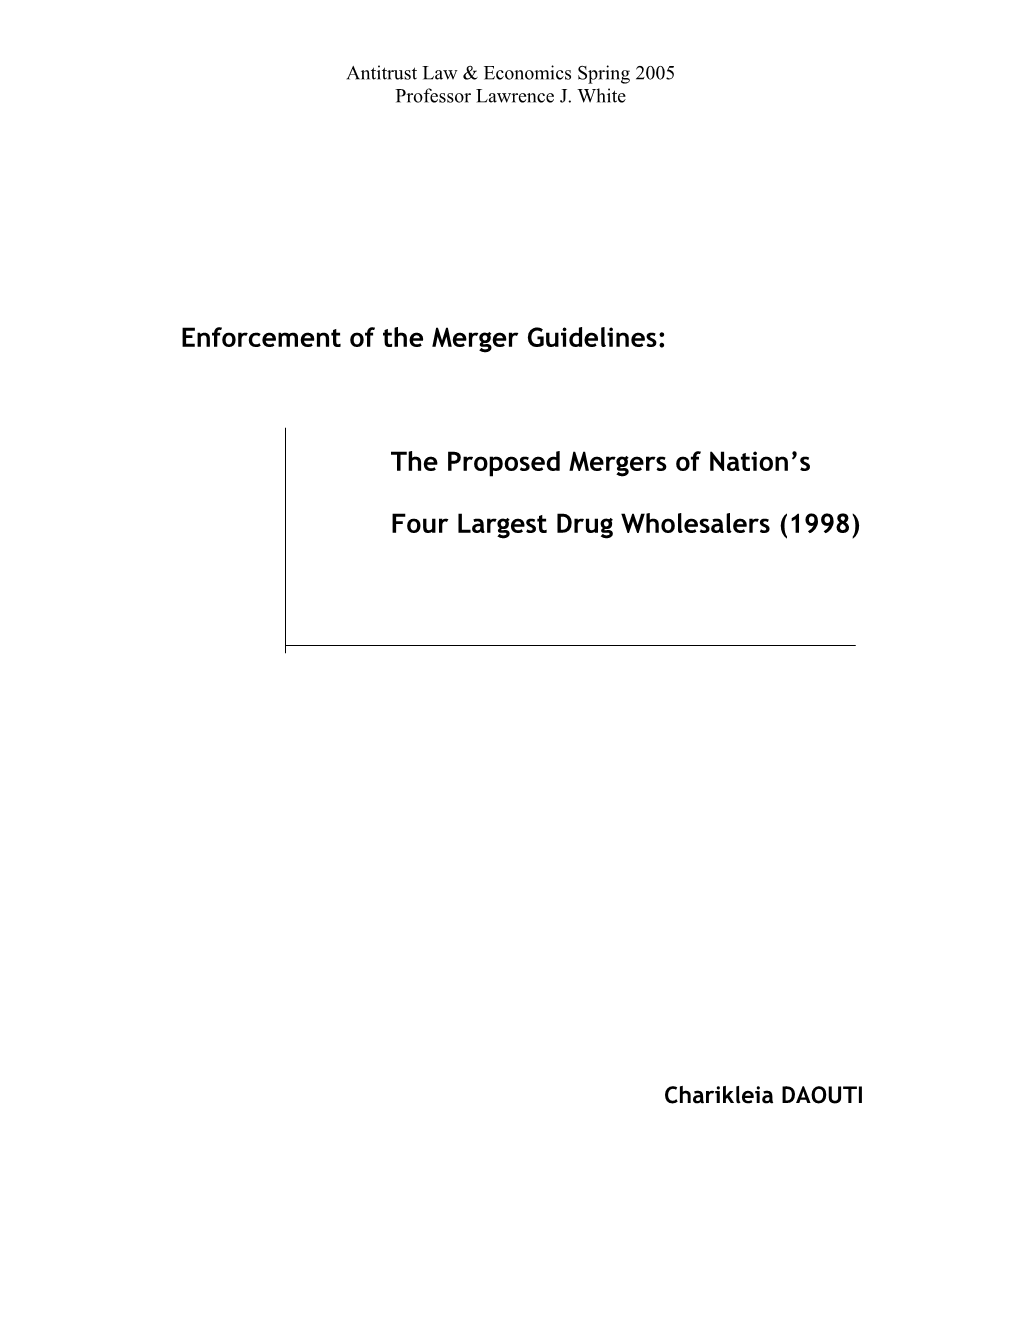 Enforcement of the Merger Guidelines